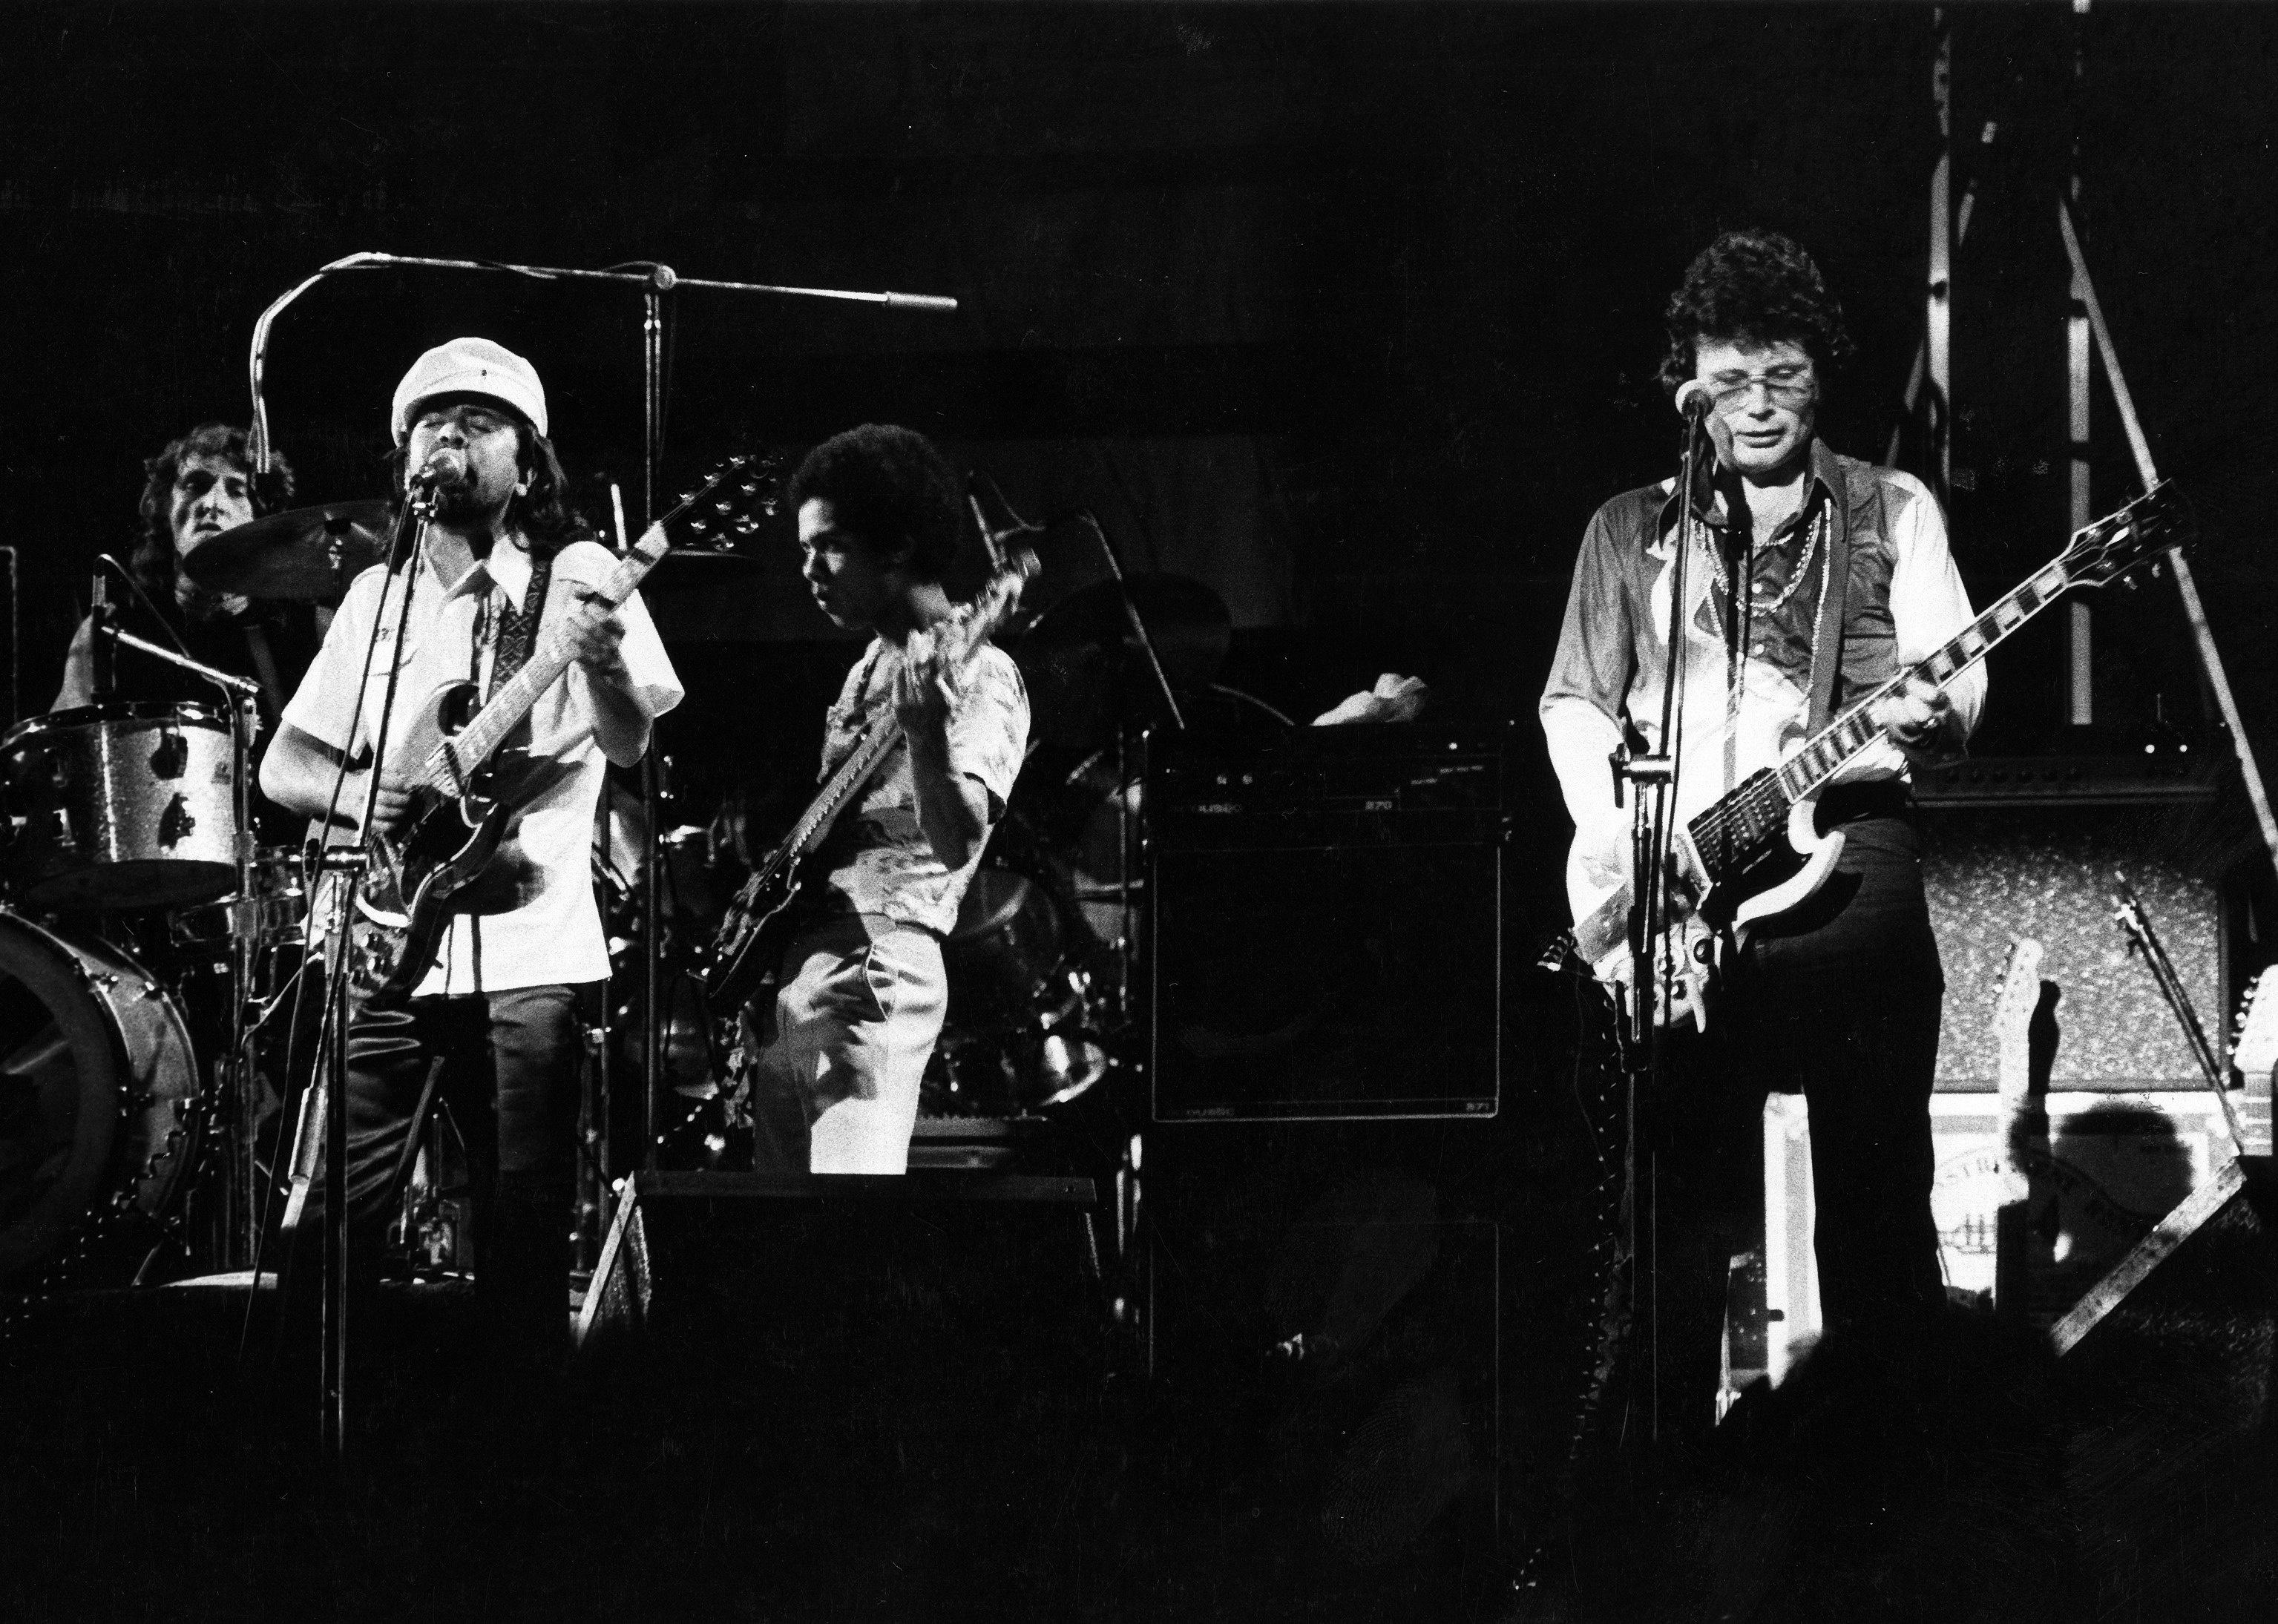 Manfred Mann performing on stage.